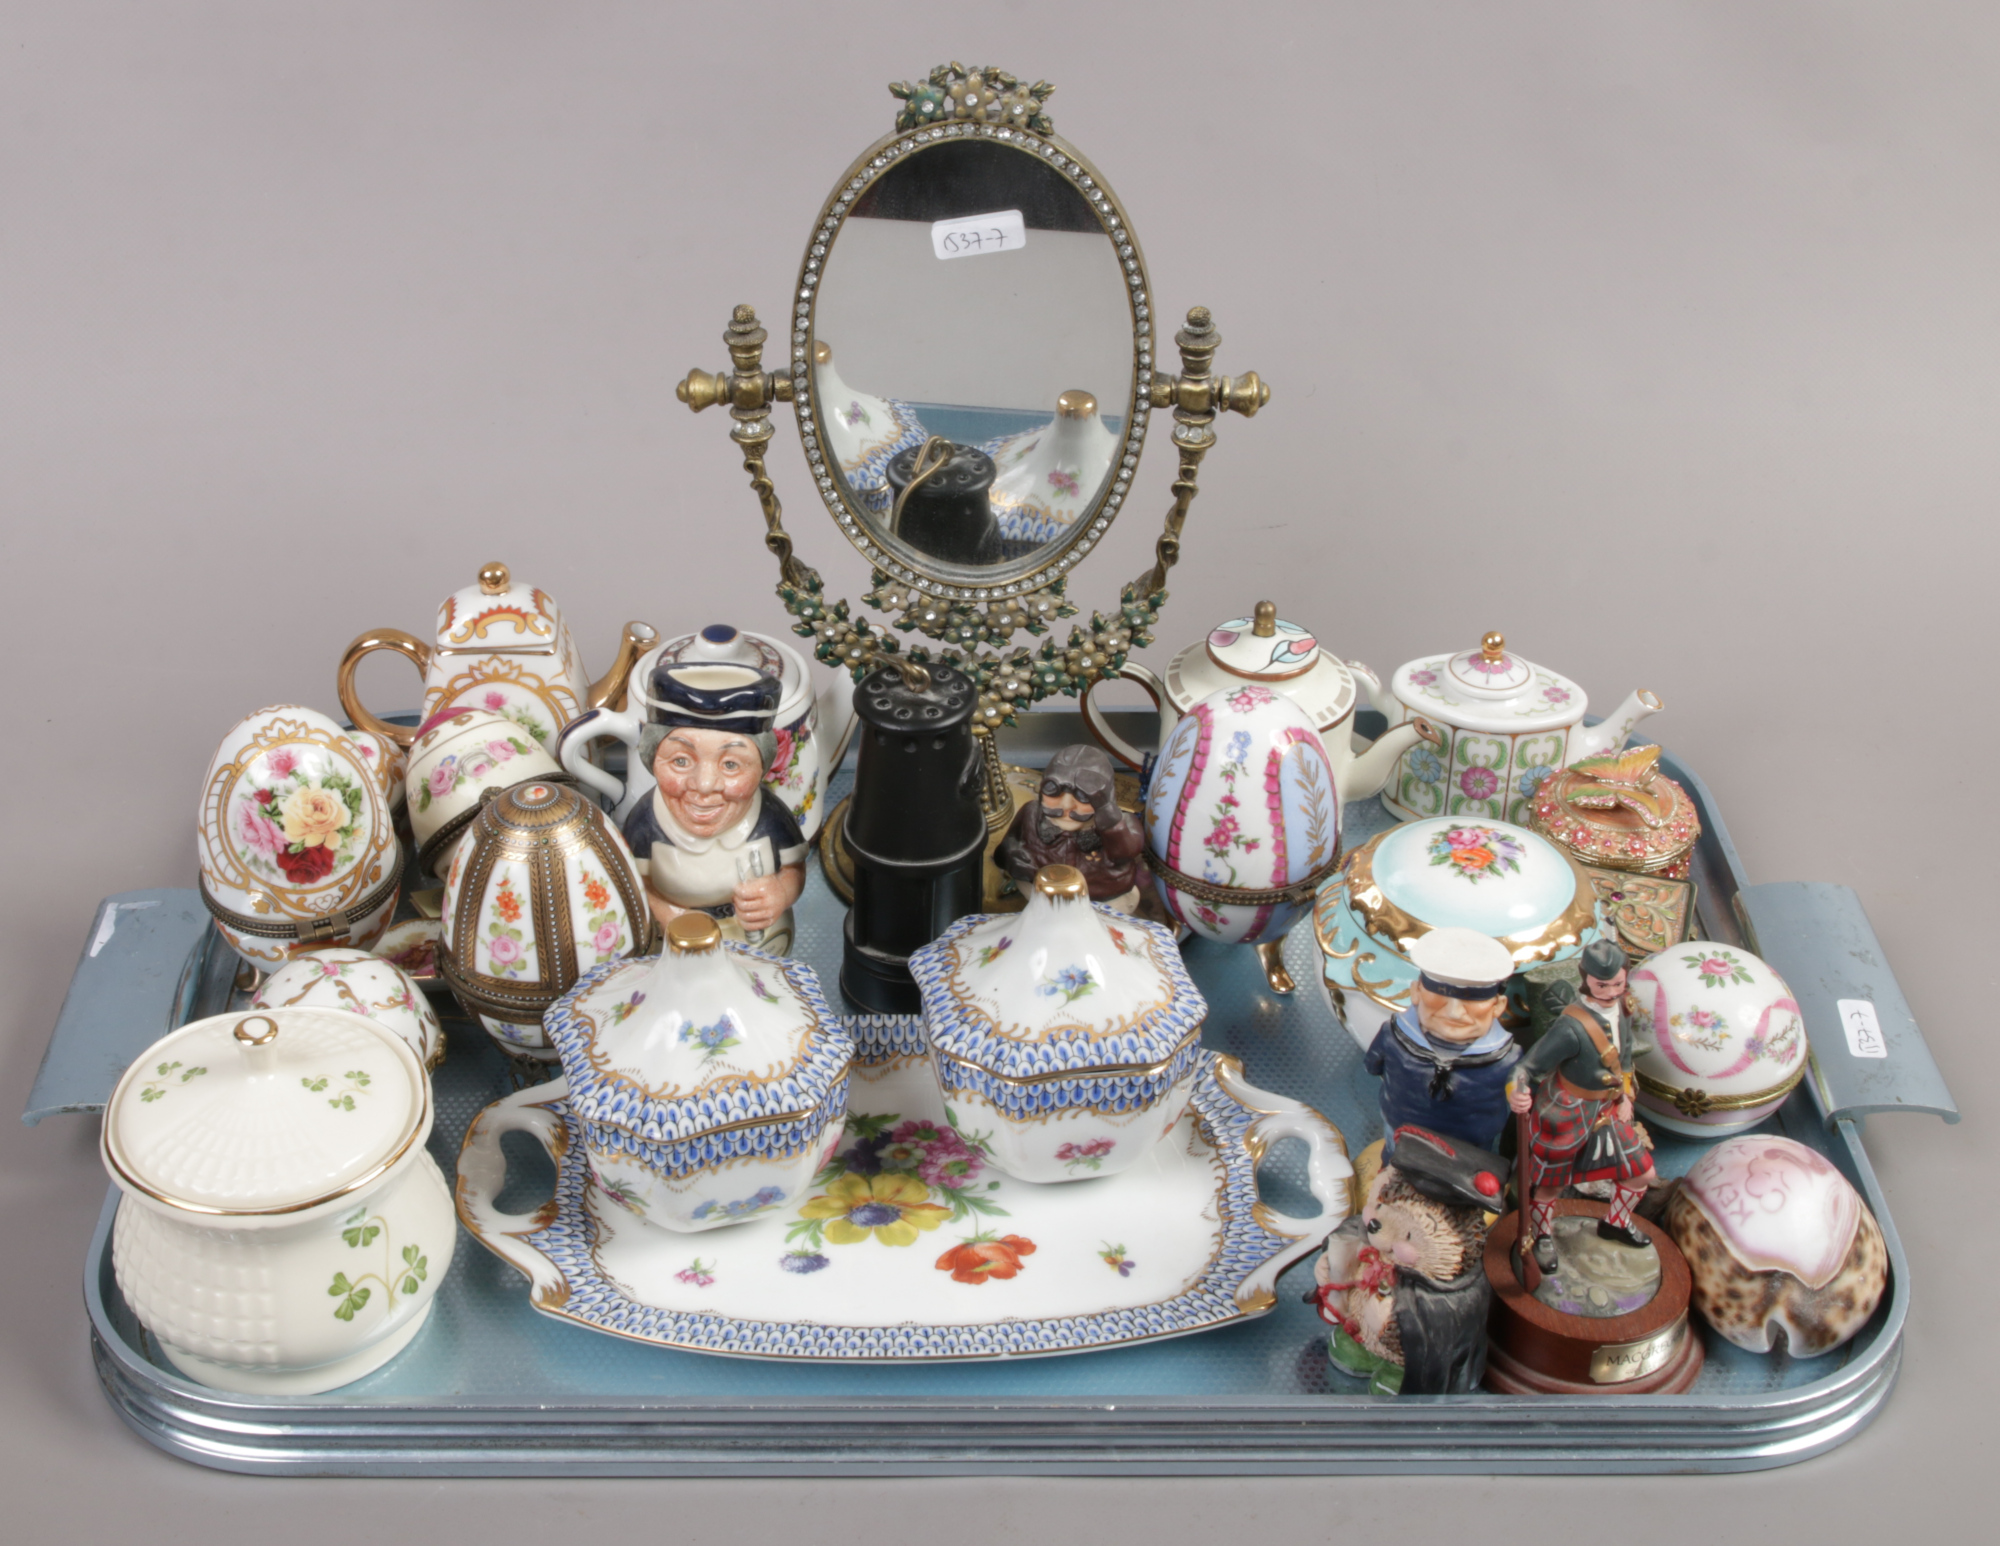 A tray of collectables including porcelain trinket boxes, bonbonnieres, Britain's lead Macgregor